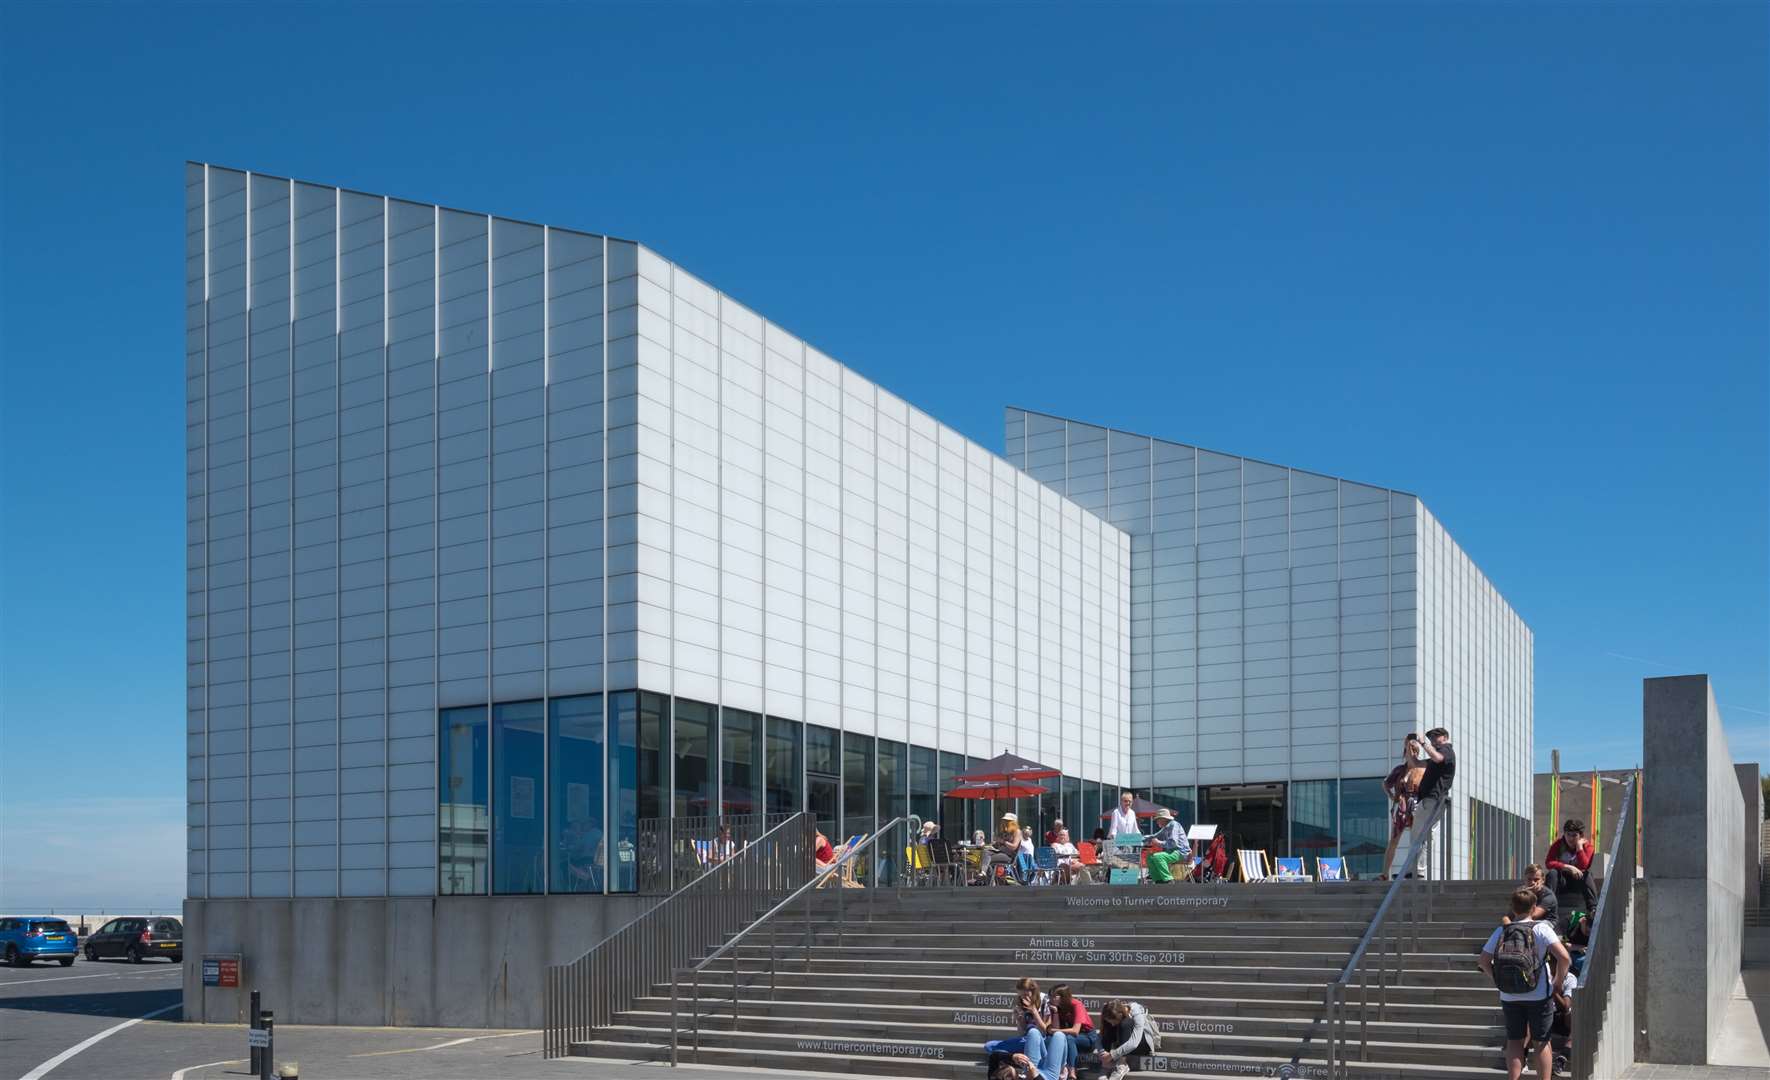 Turner Contemporary in Margate will host the prize exhibition until January